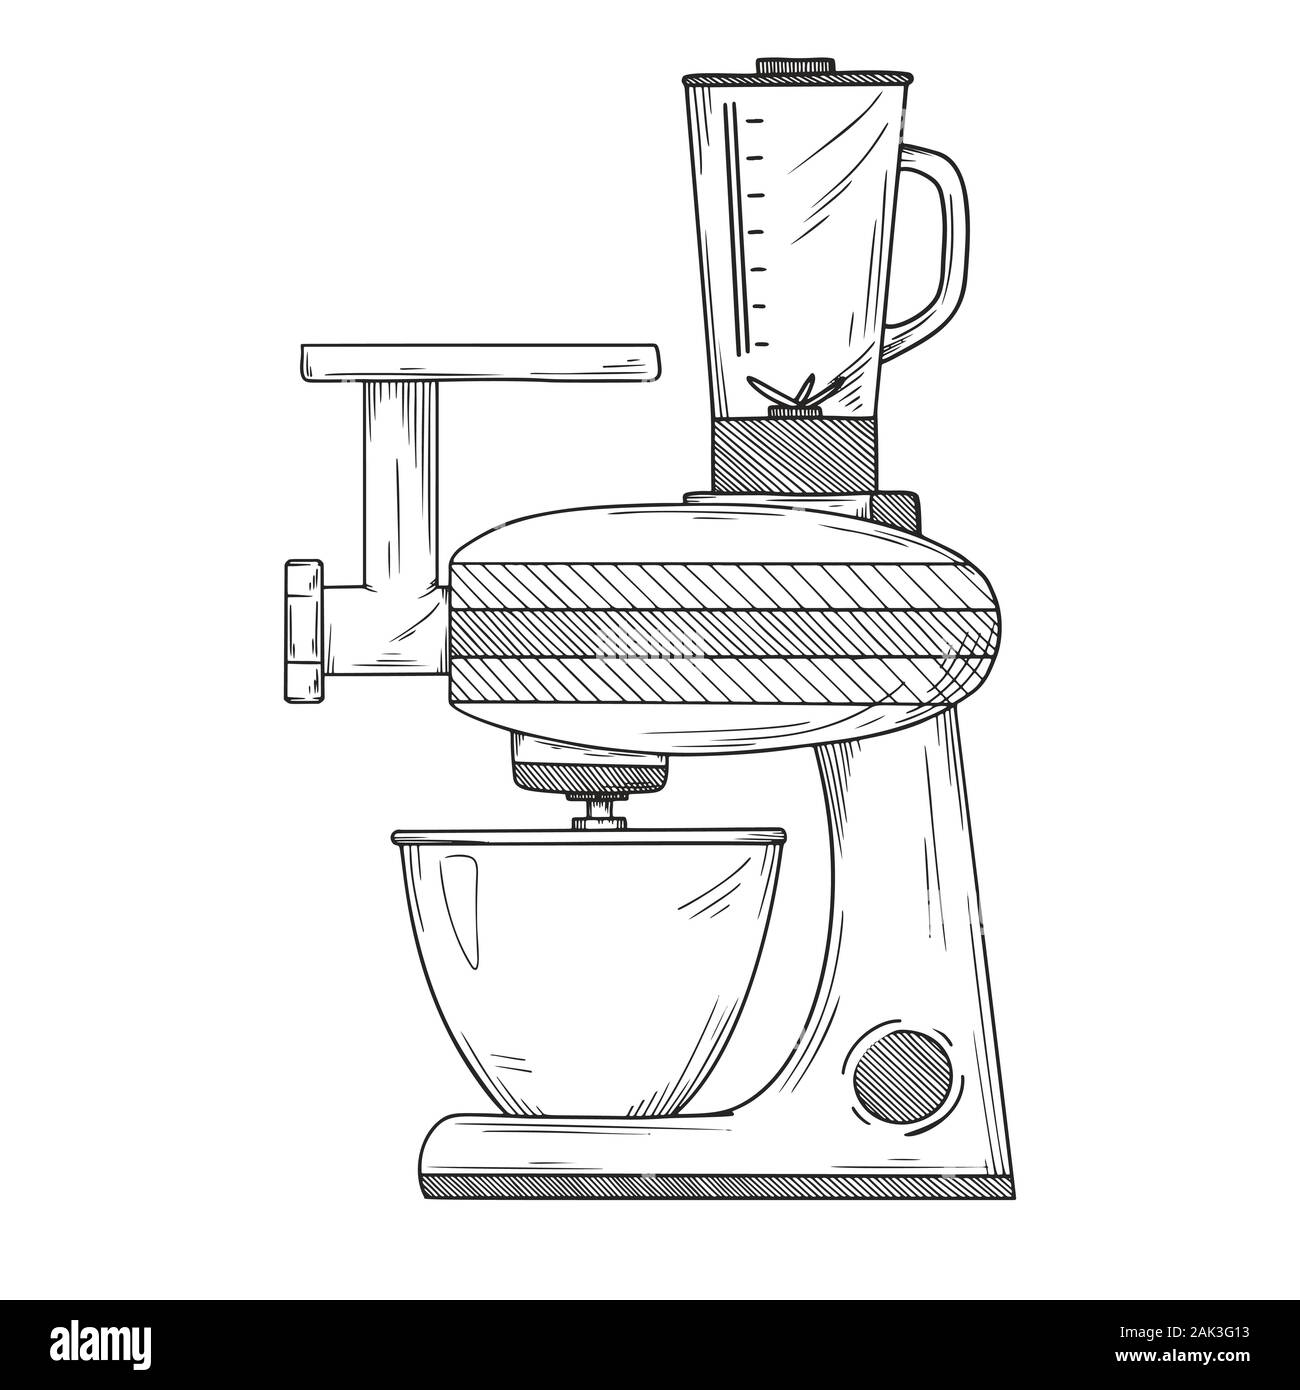 https://c8.alamy.com/comp/2AK3G13/food-processor-with-different-nozzles-isolated-on-white-background-vector-illustration-in-sketch-style-2AK3G13.jpg